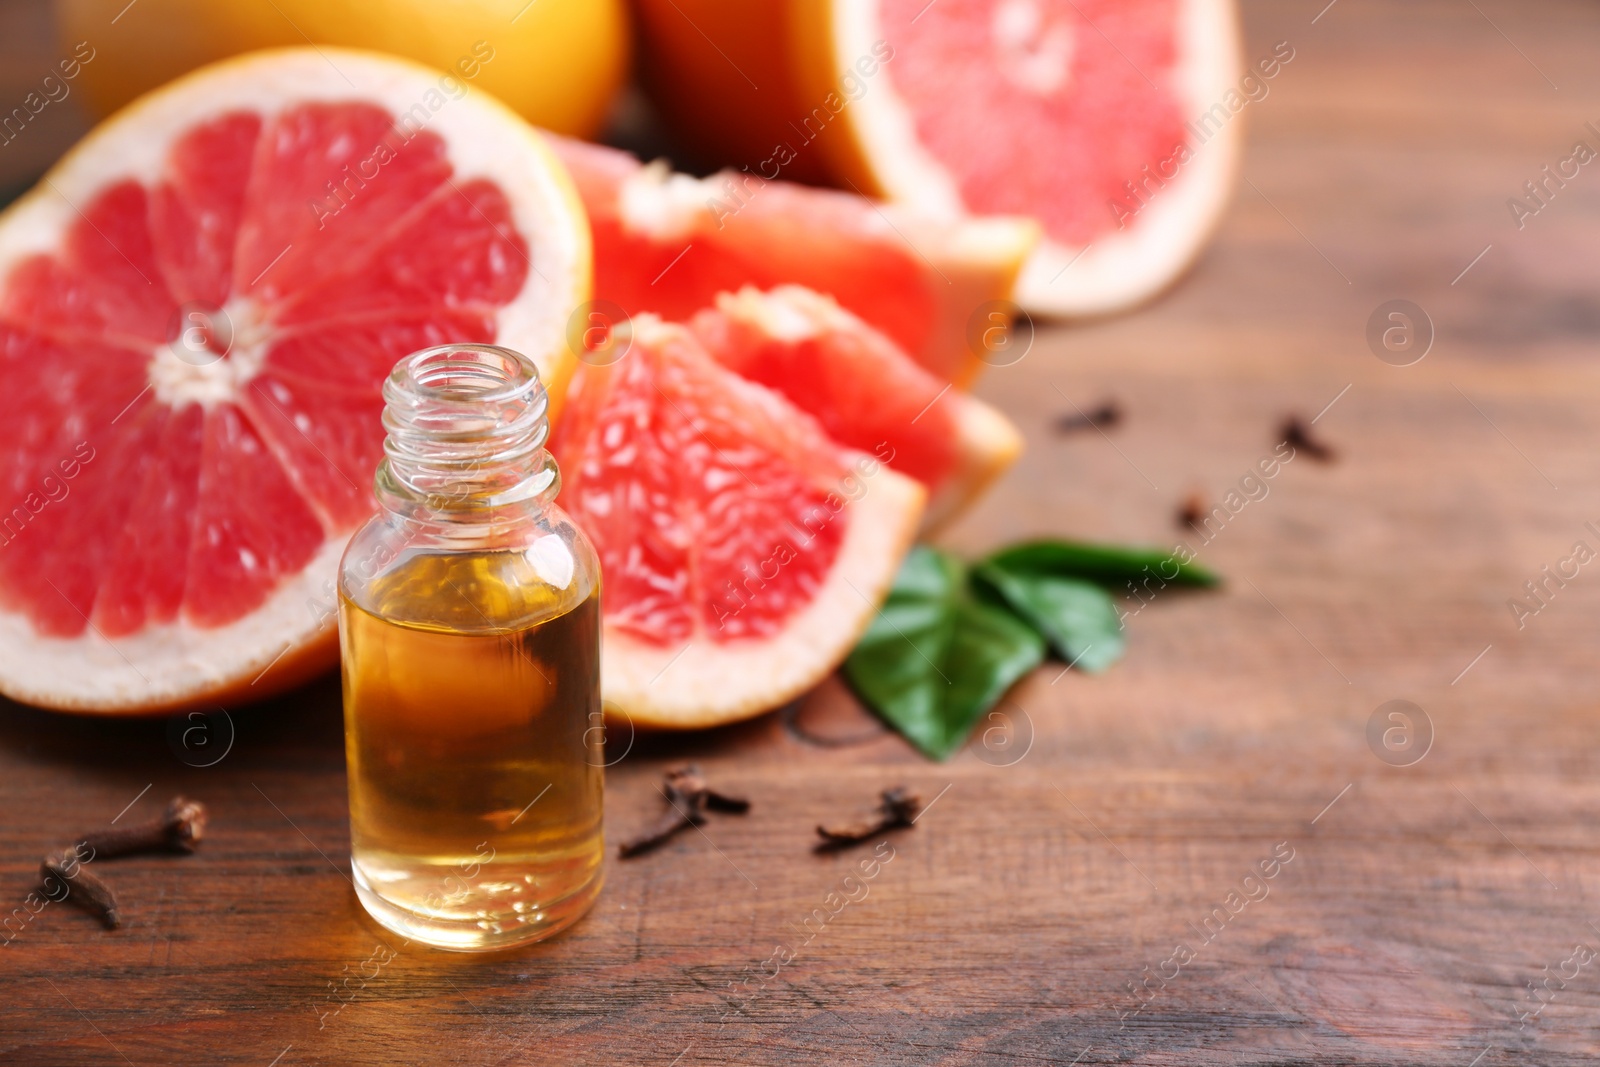 Photo of Bottle of essential oil and fresh grapefruit on wooden table, space for text